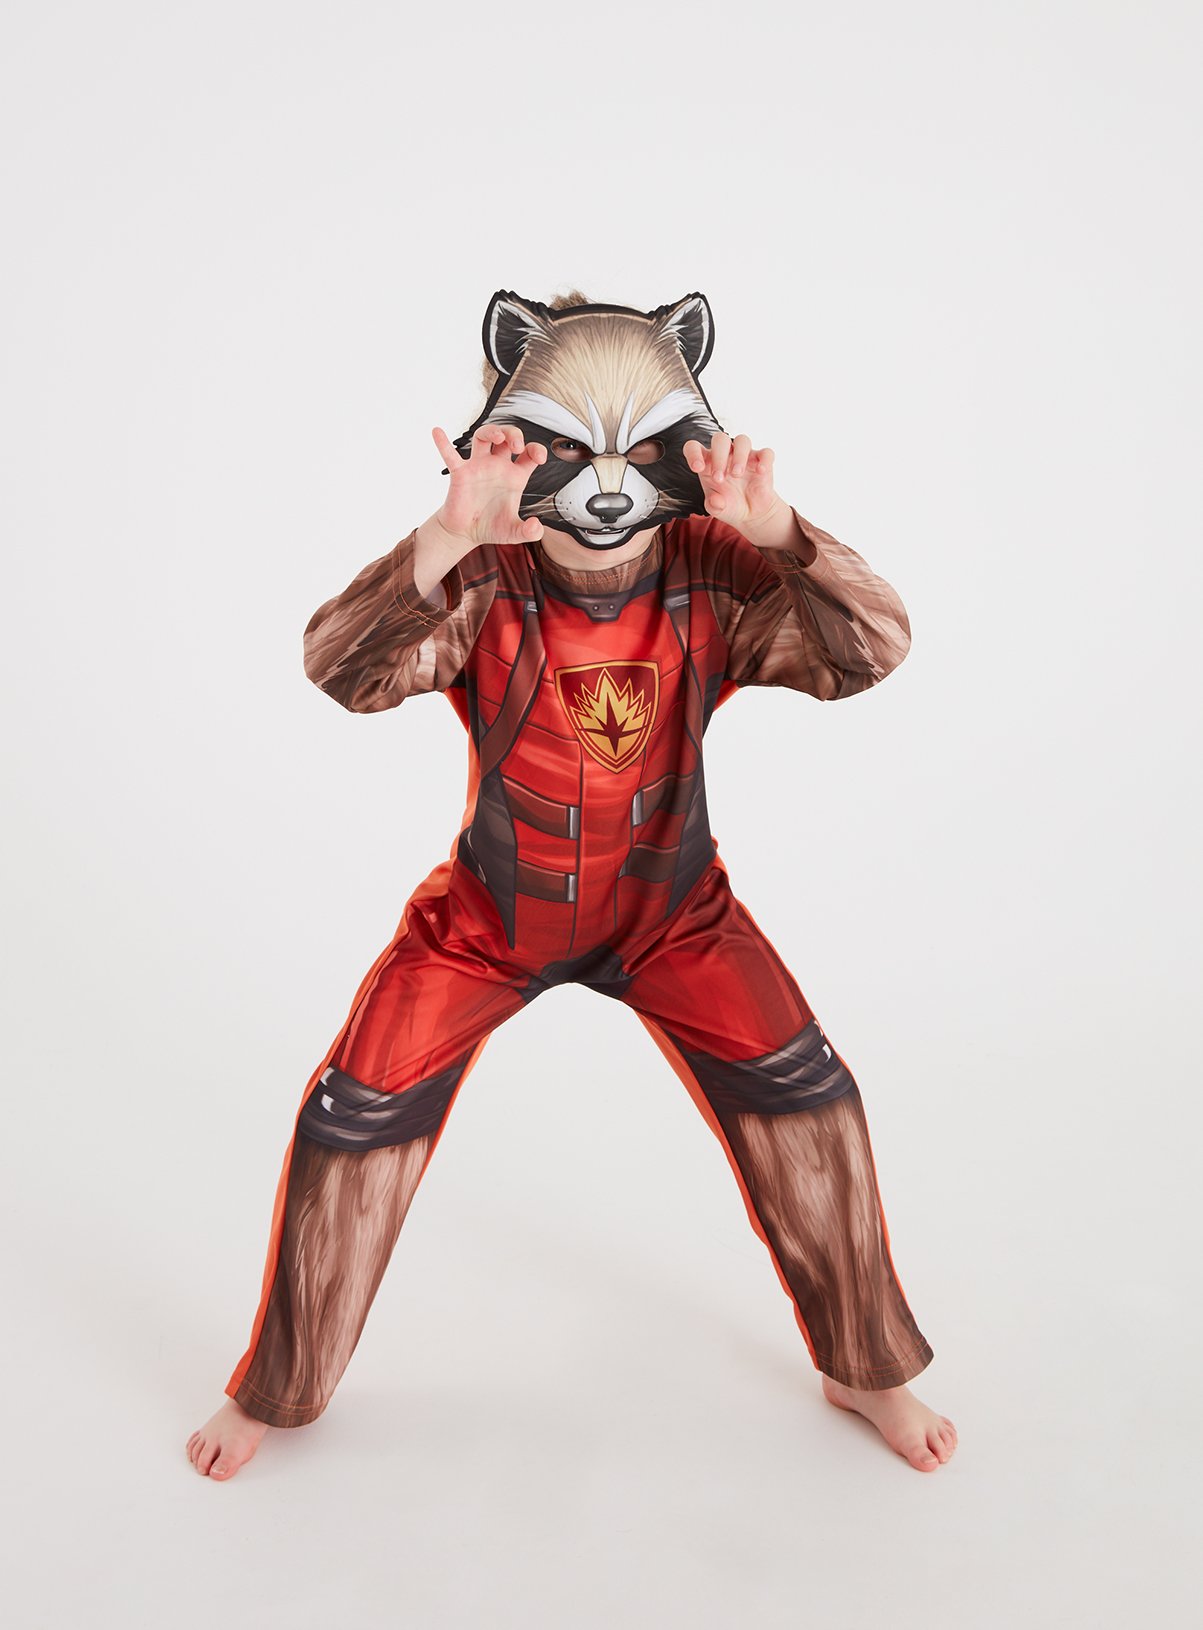 Marvel Guardians Of The Galaxy Rocket Raccoon Costume Review